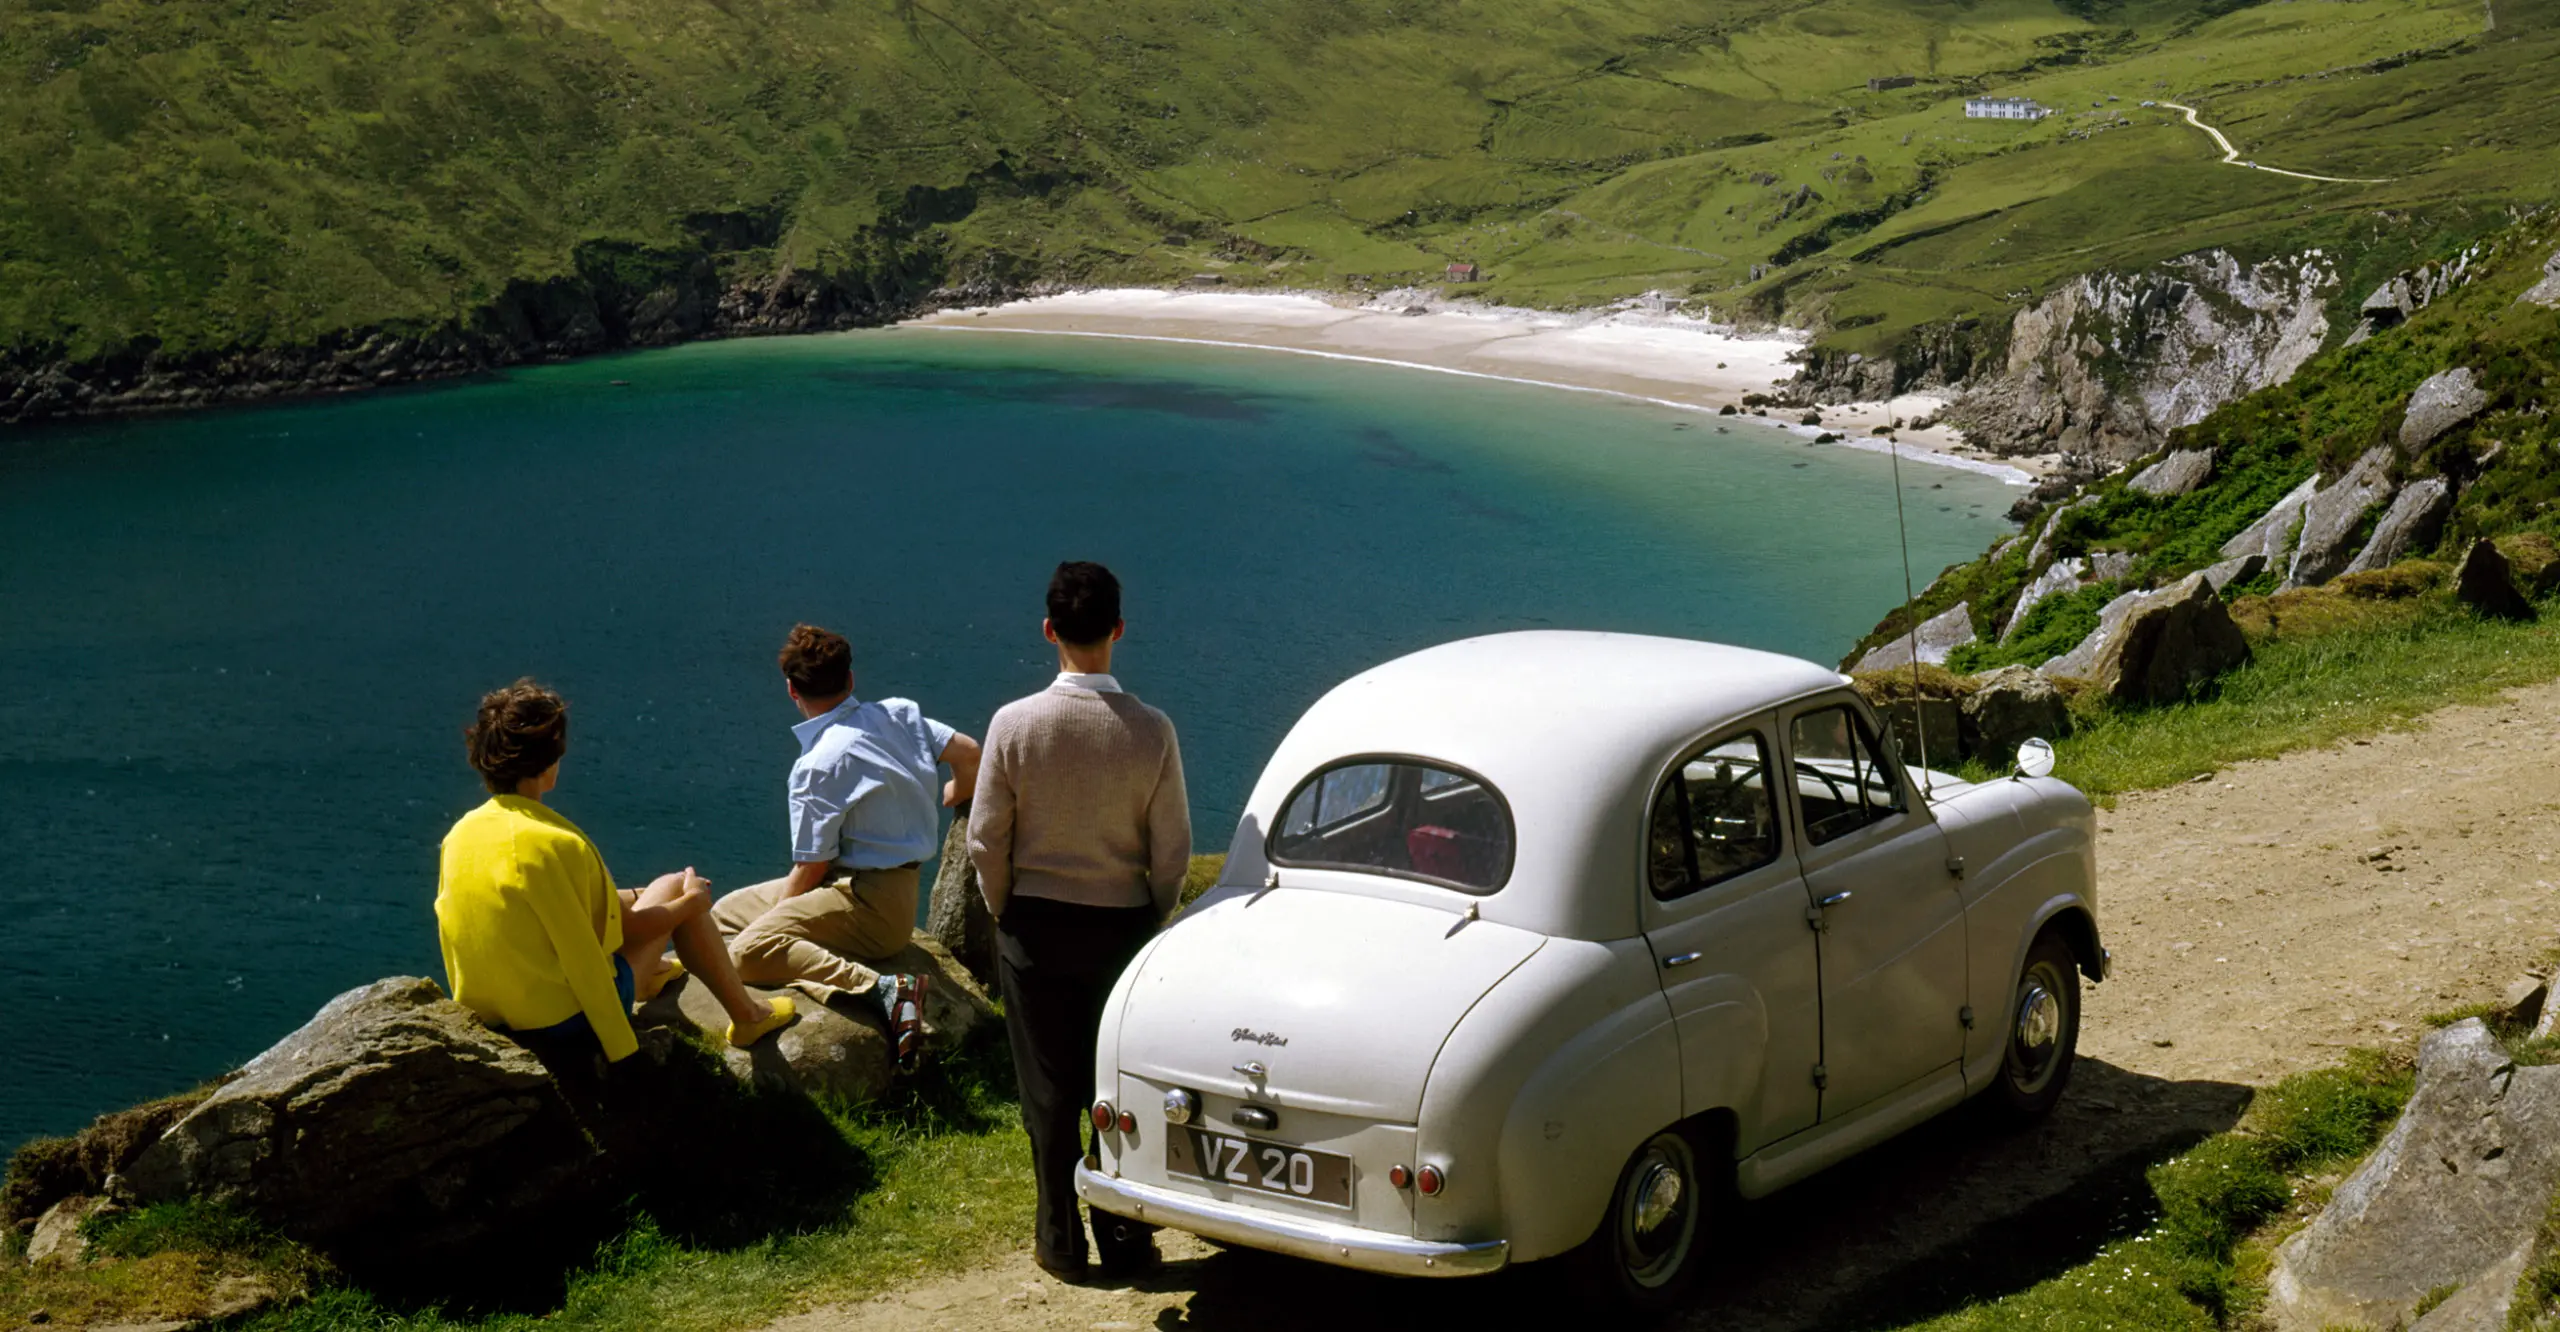 High-saturated image of three people in late 40s casual clothingstanding outside their white car overlooking out to a bay on a sunny day